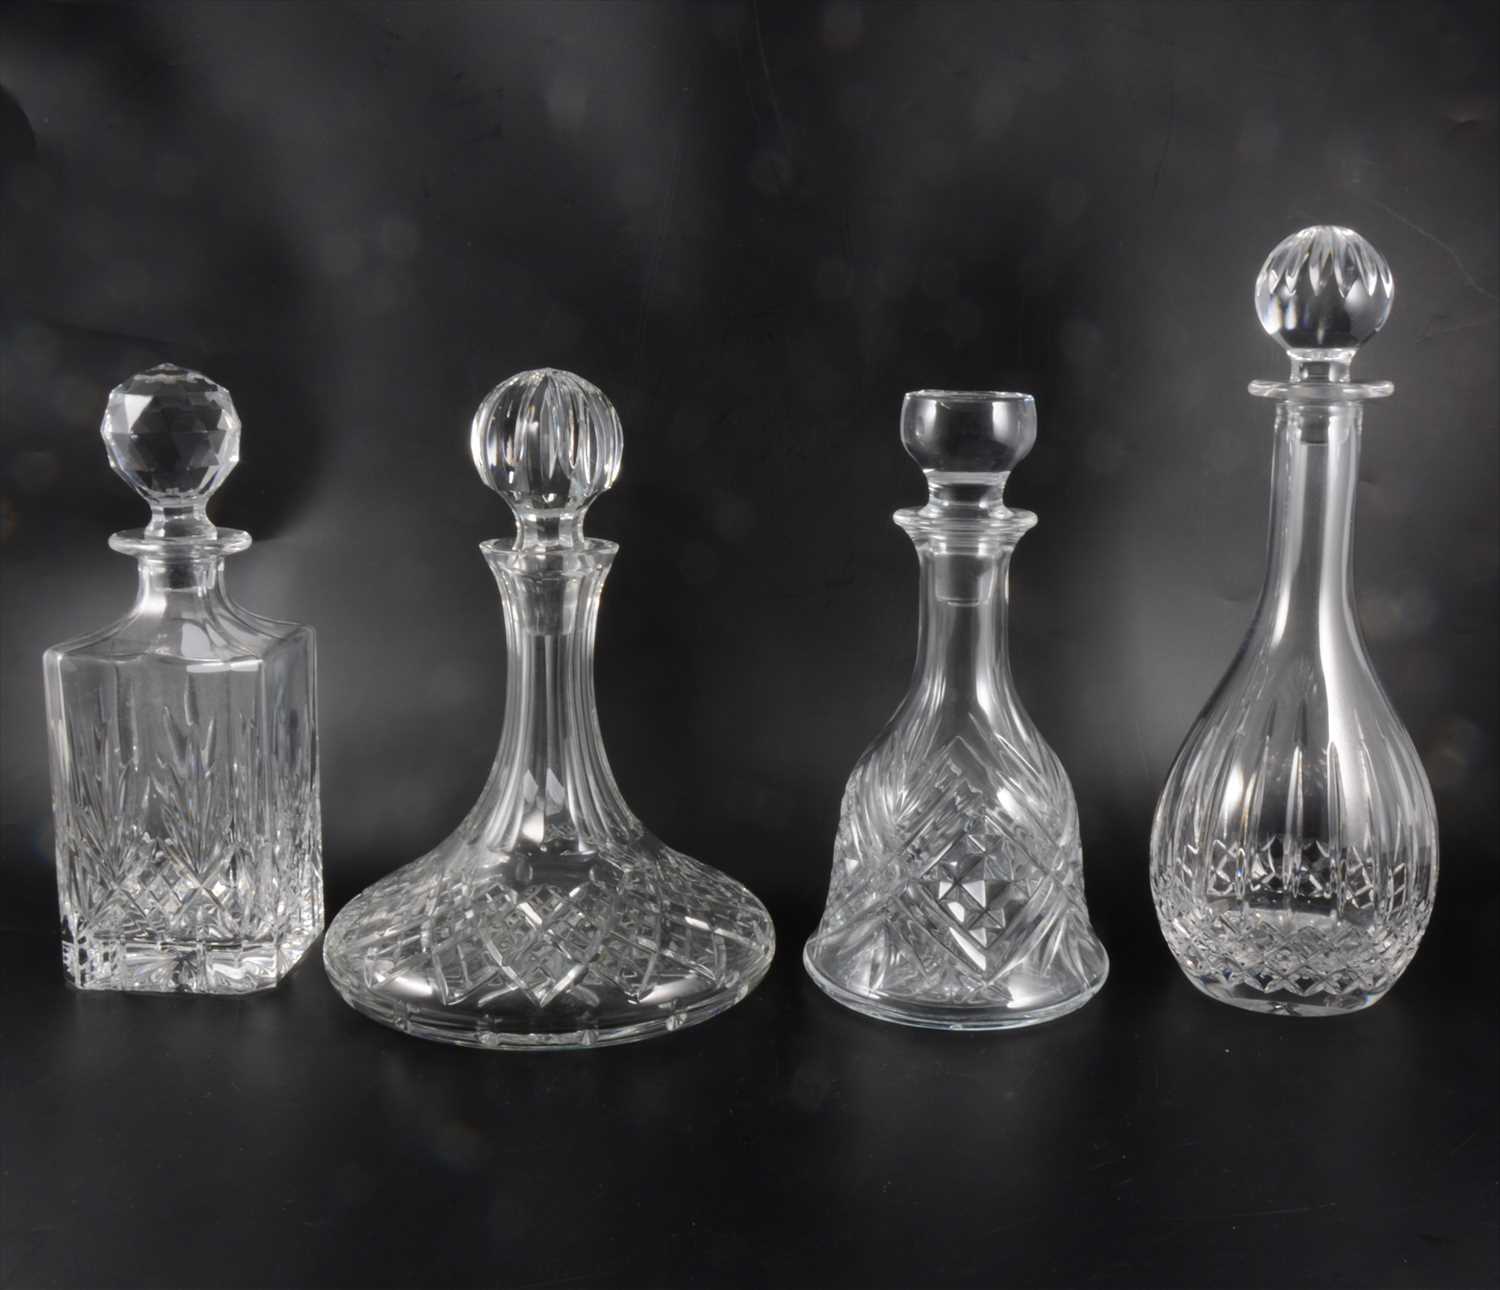 Lot 29 - Four glass decanters, including Waterfords Crystal ships decanter, another Waterfords Crystal decanter, and two others.